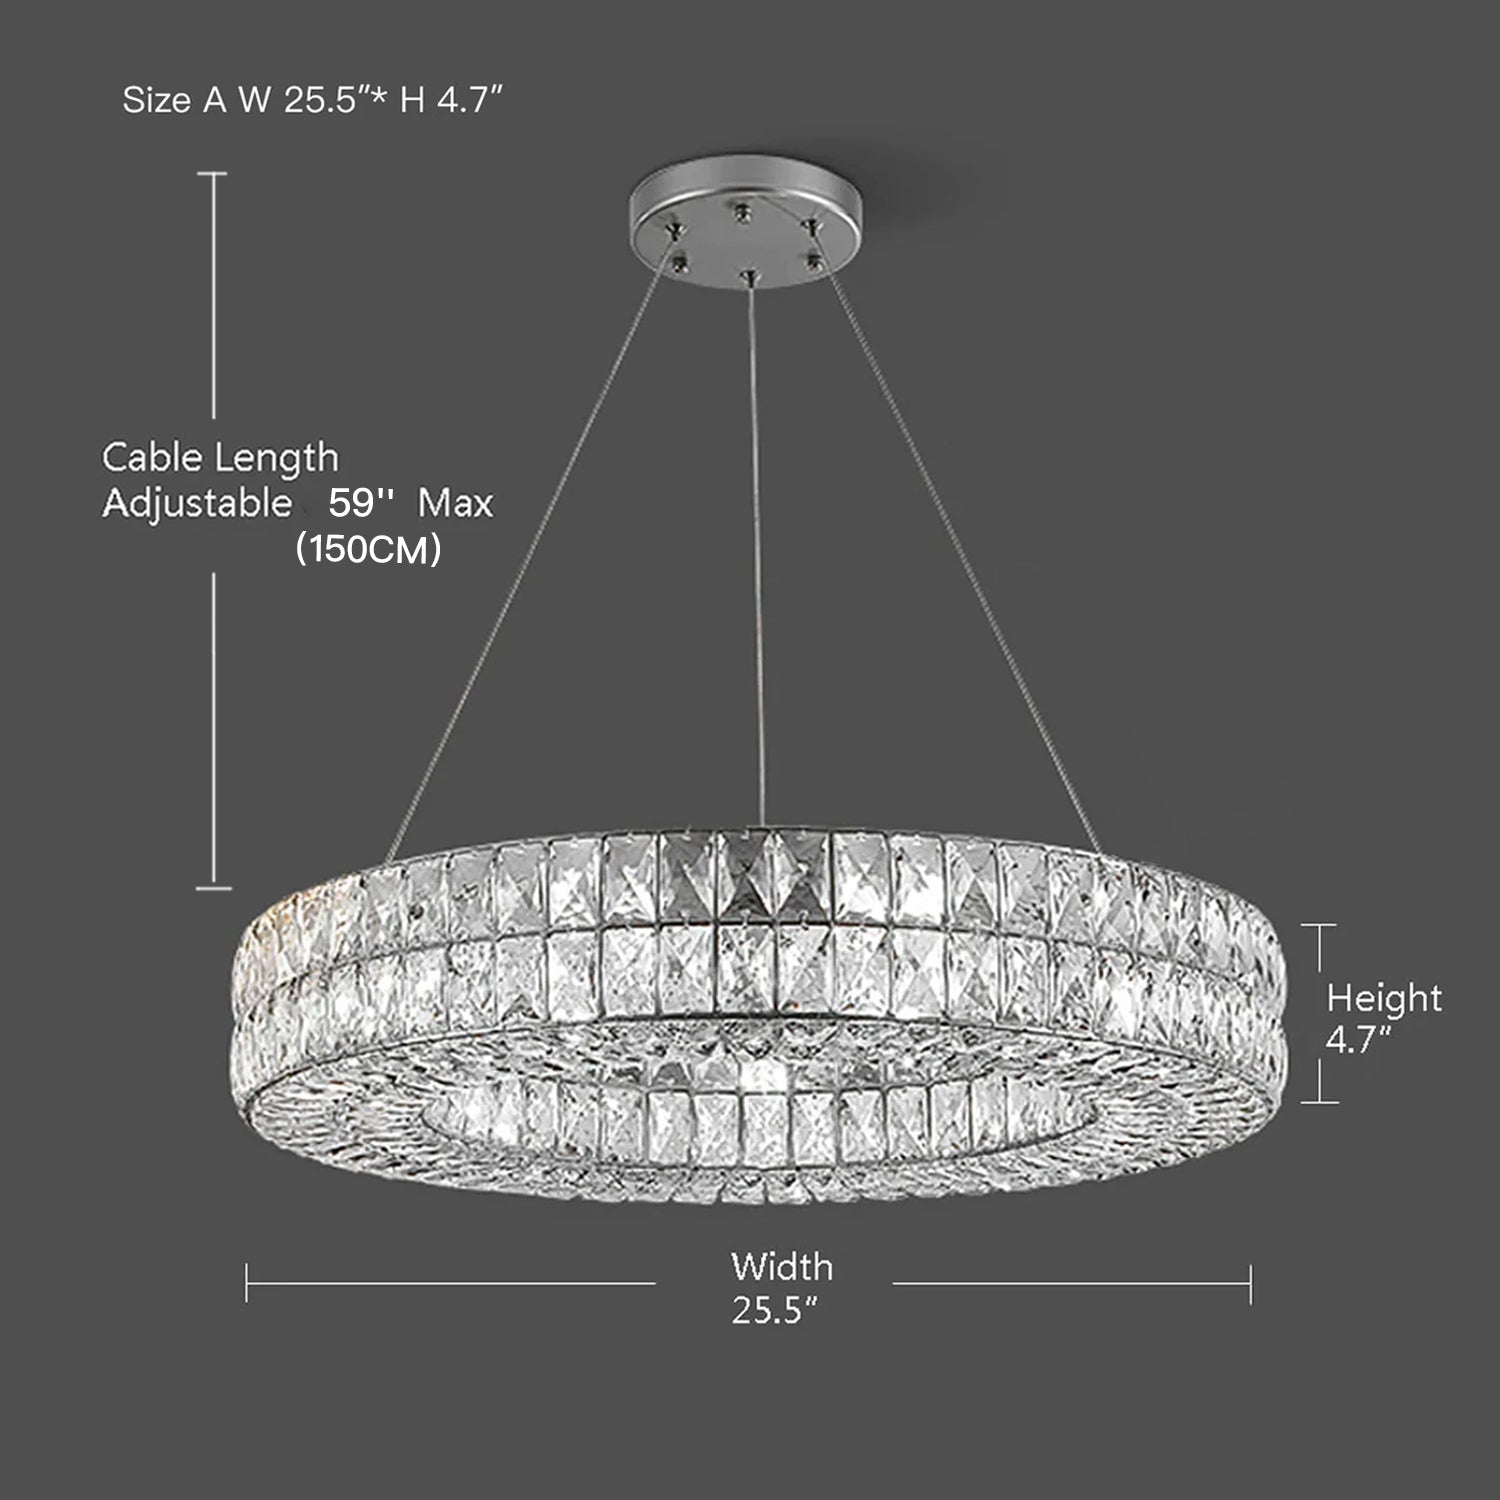 Luxury Style One Ring Crystal Chandelier - Living room